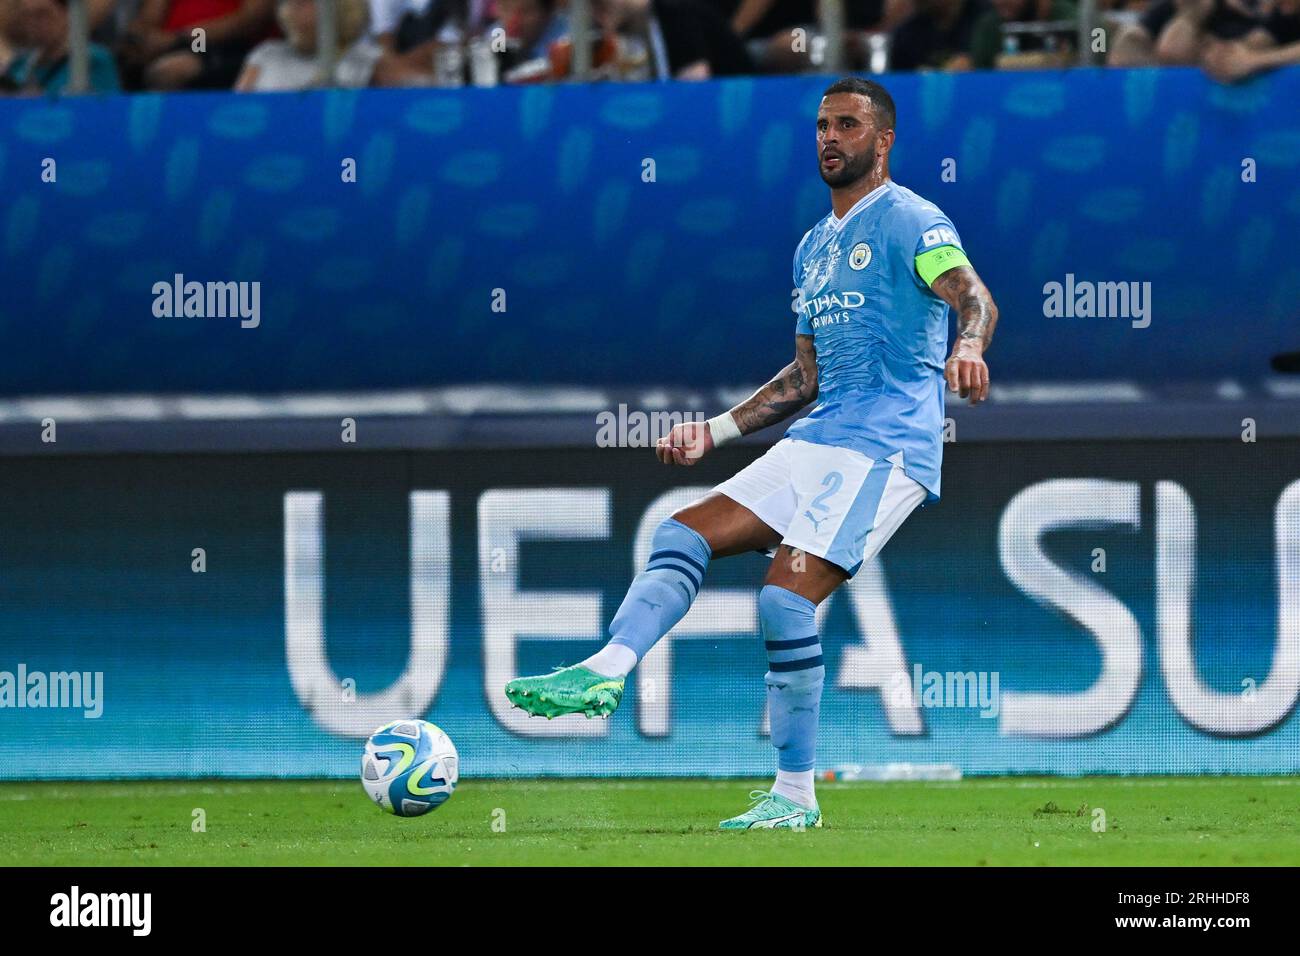 Piraeus, Greece. 16 August, 2023: Kyle Walker of Manchester City in action during the UEFA Super Cup 2023 match between Manchester City FC and Sevilla FC at Georgios Karaiskakis Stadium in Piraeus, Greece. August 16, 2023. (Photo by Nikola Krstic/Alamy) Stock Photo